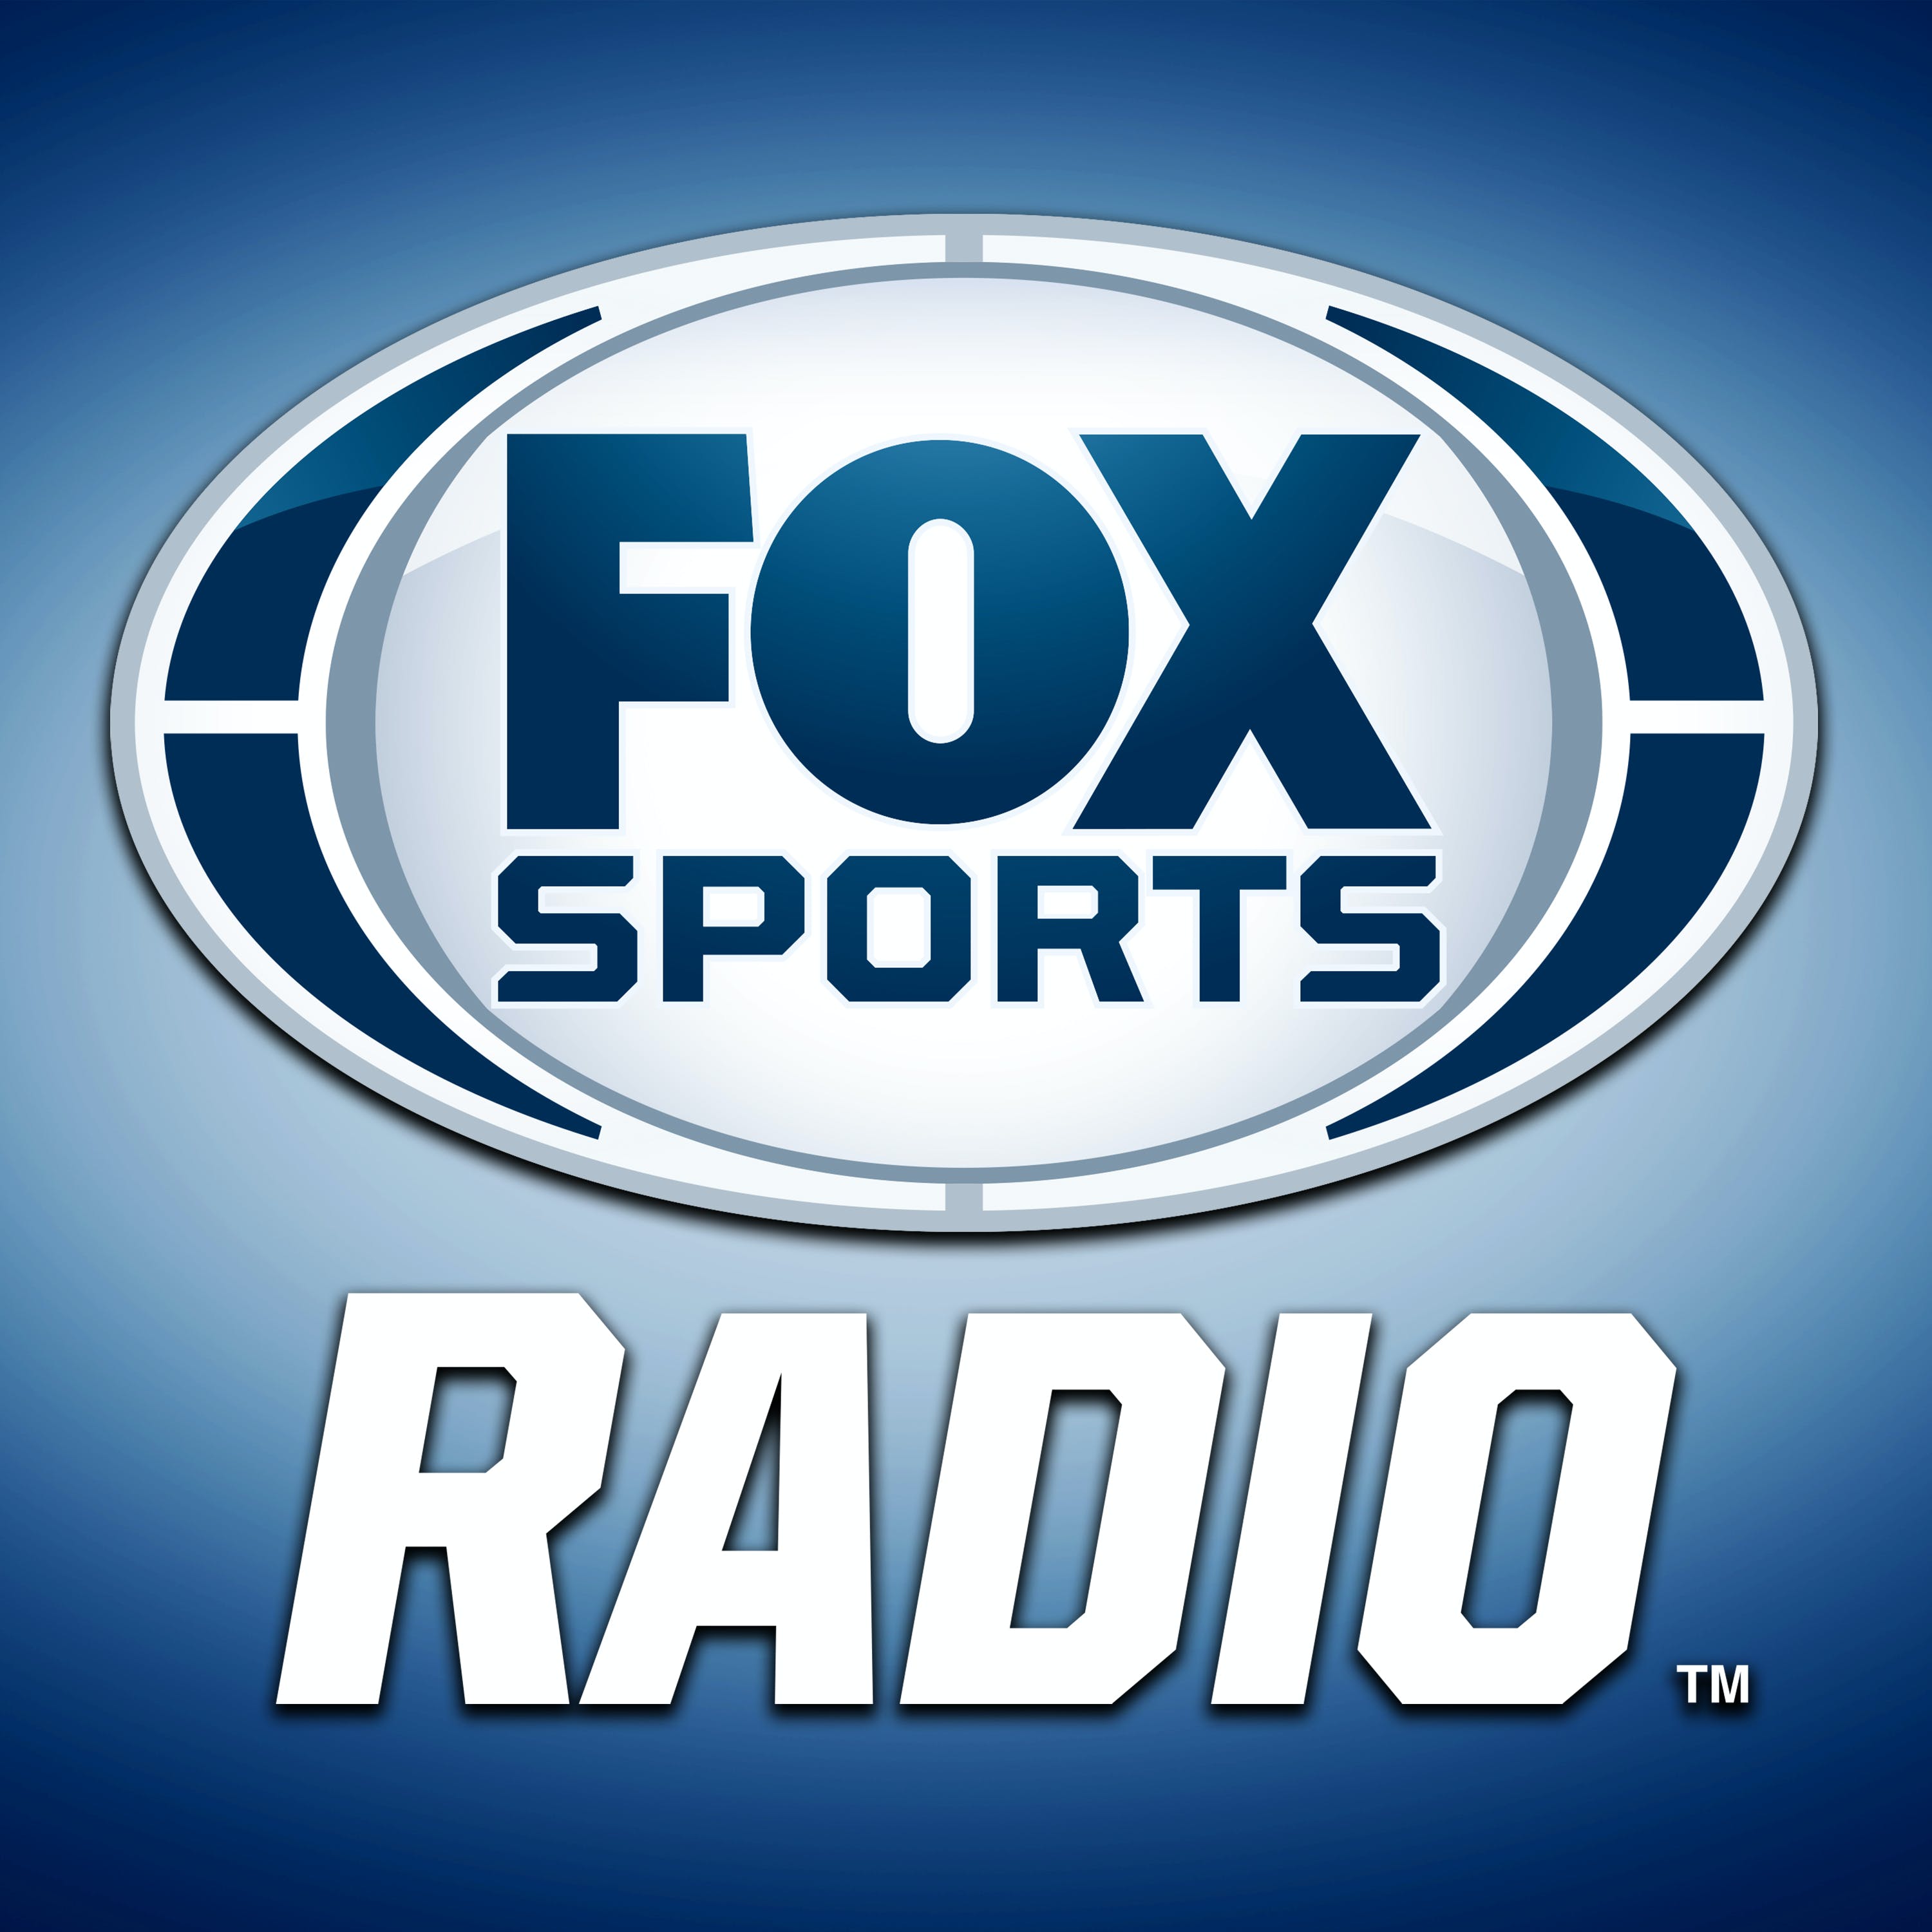 05/23/2021 - FOX Sports Sunday with Andy Furman and Brian Noe